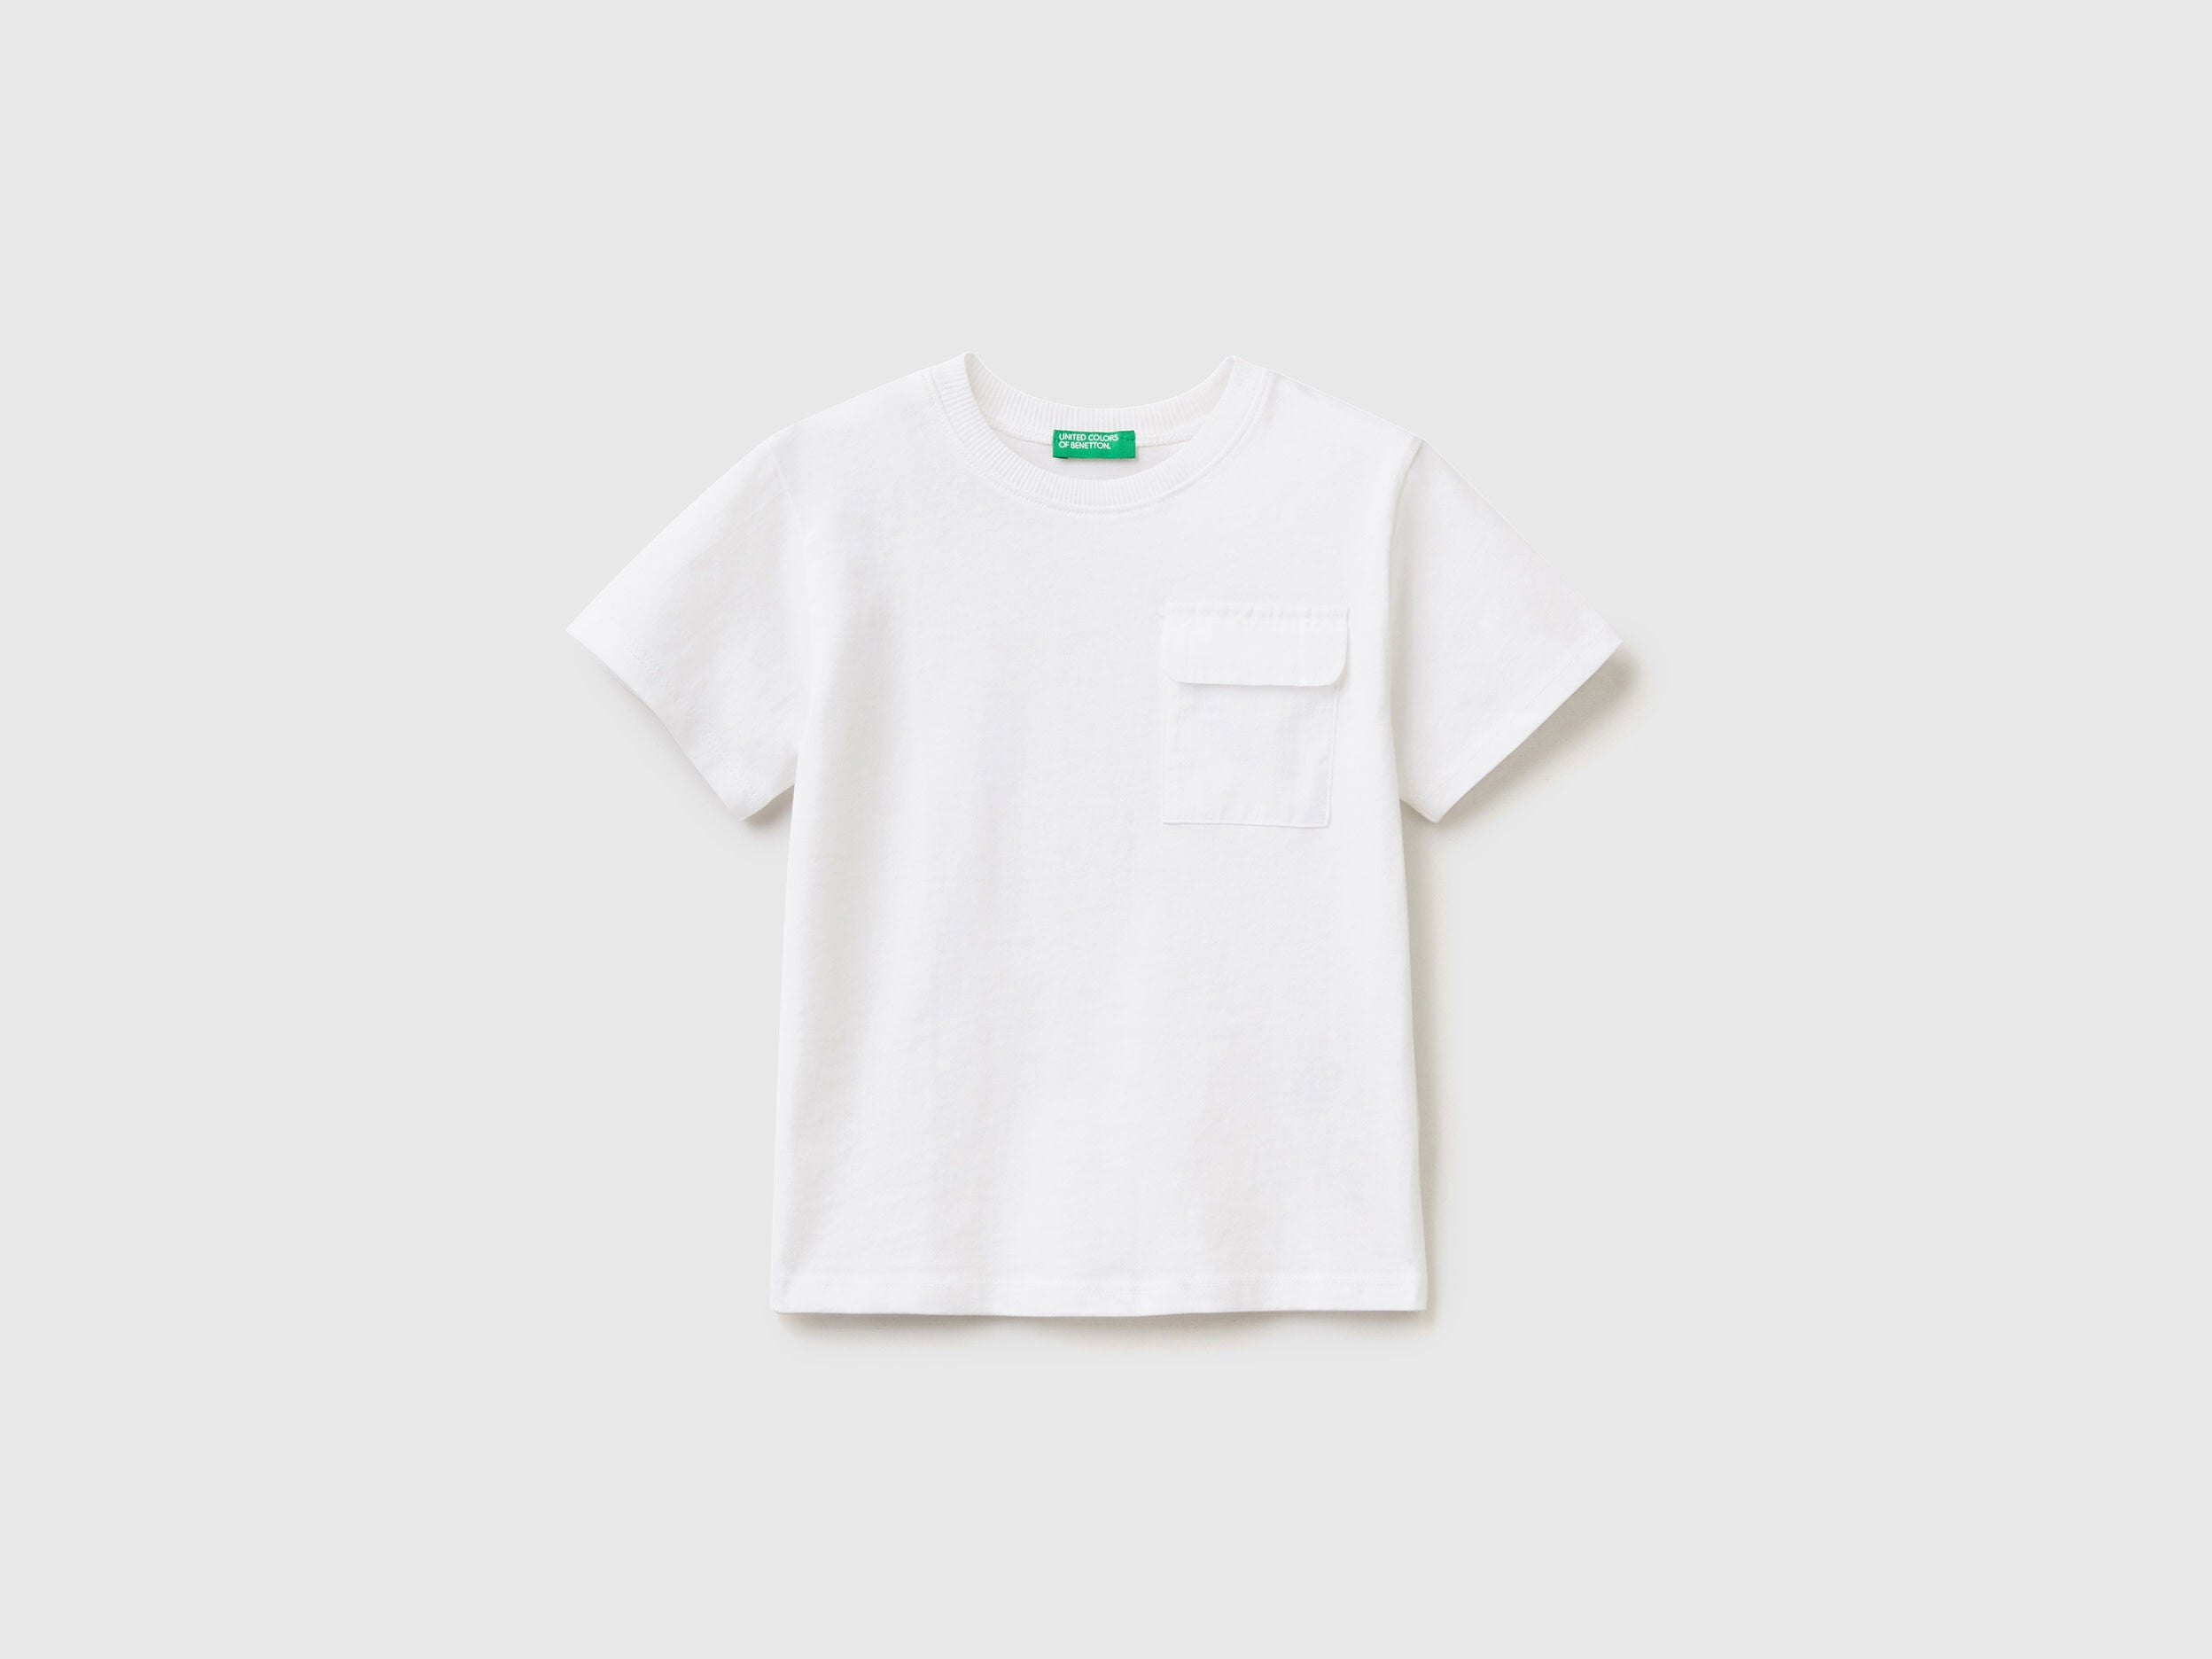 100% Cotton T-Shirt With Pocket